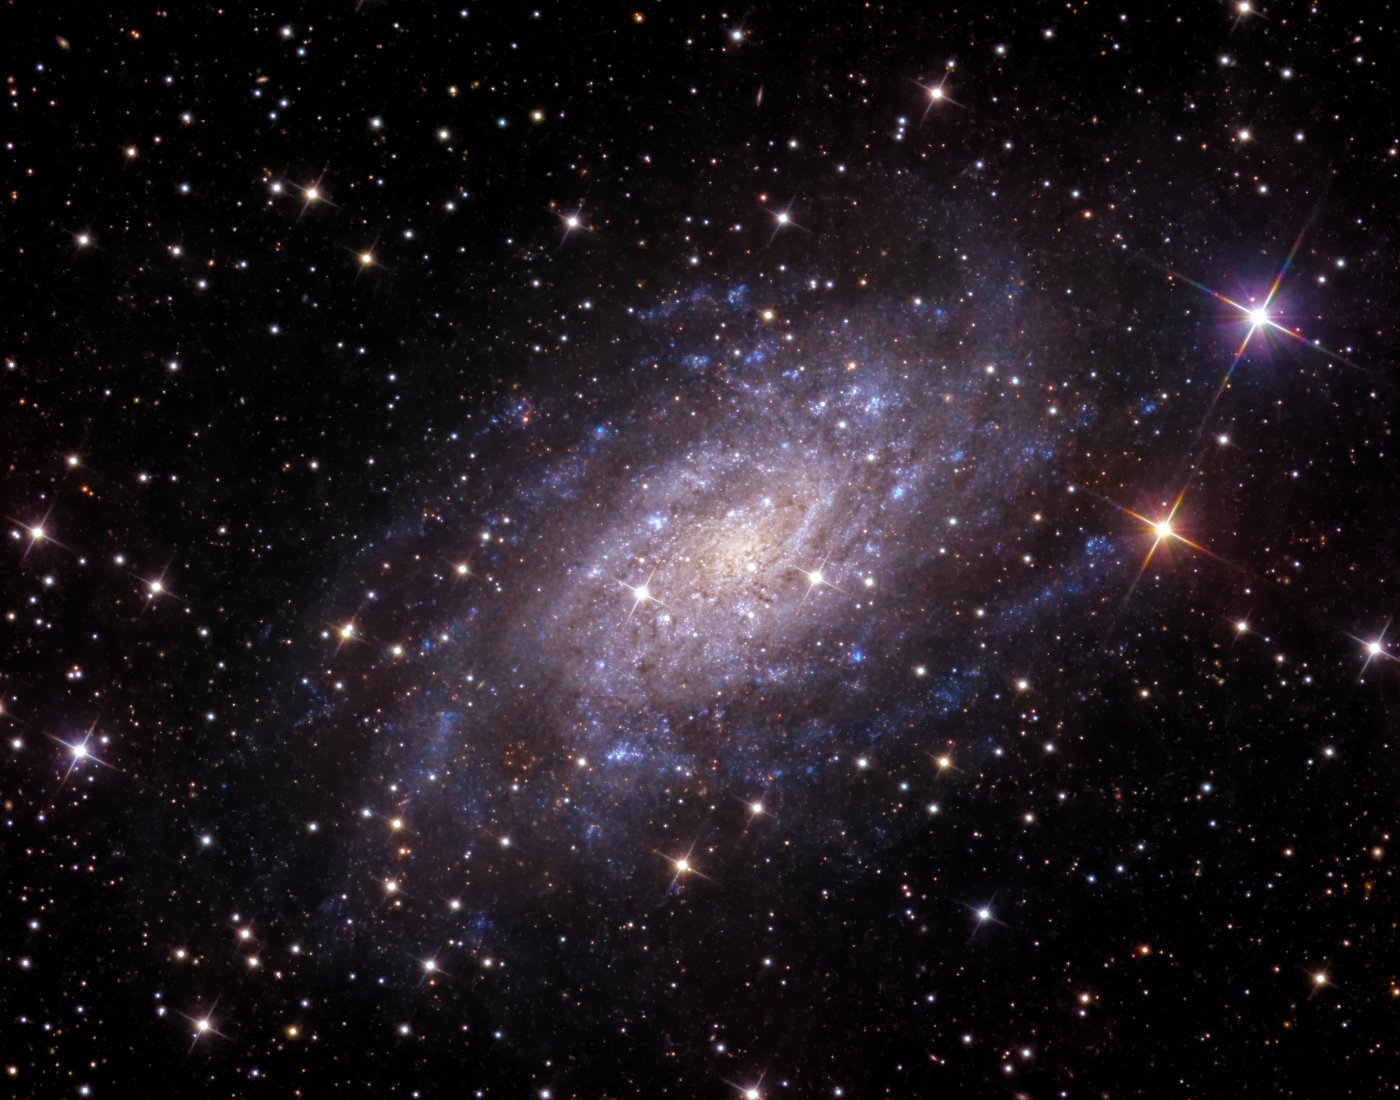 NGC 2403 (Caldwell 7) and NGC 2404 in continuum light